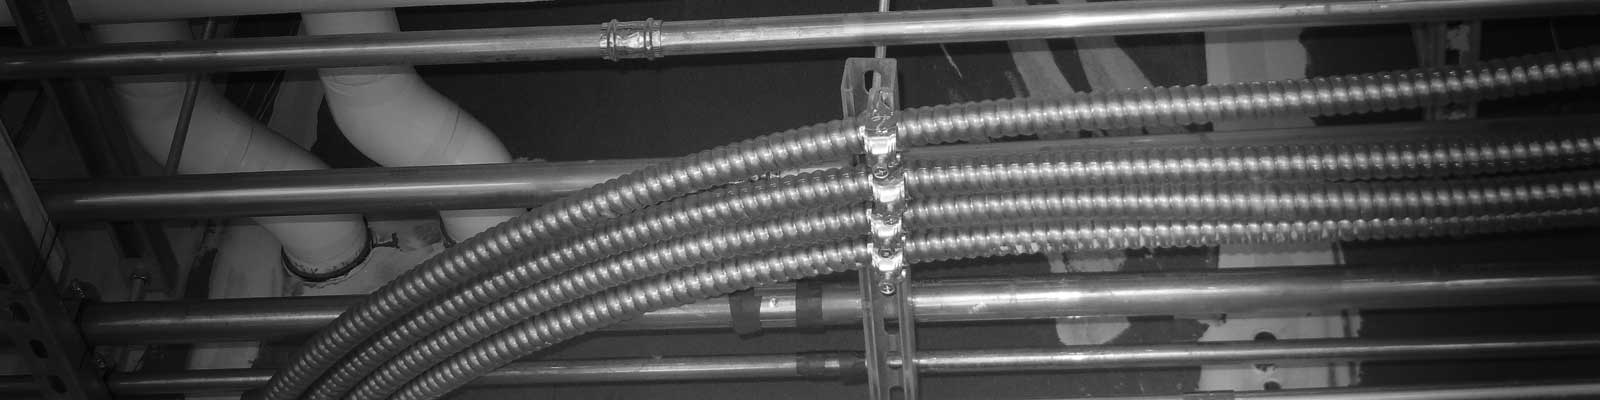 Is there a “standard” for what rigid conduit is used for vs Metal Clad cable  in situations like this? Like rigid conduit is coming from panel and MC is  going to outlets